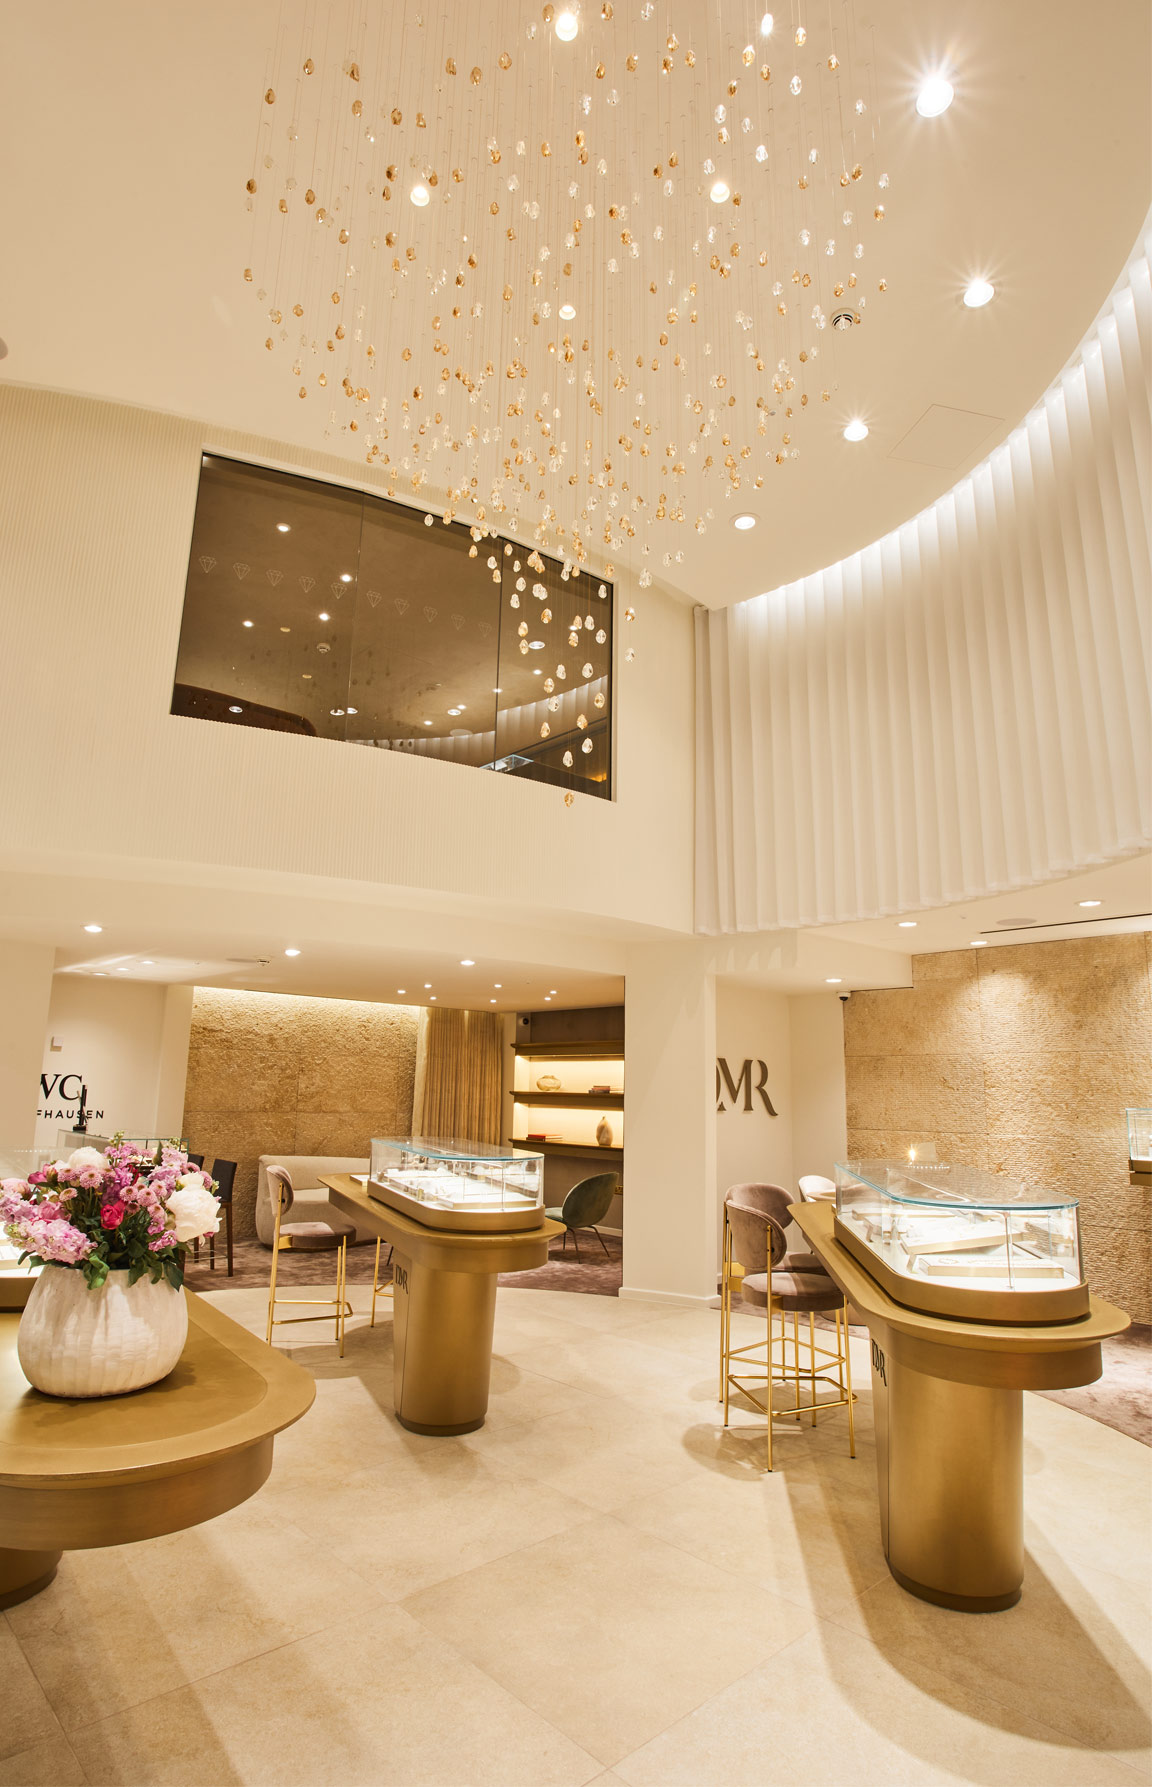 DMR Showroom Luxury Jewellery Store Liverpool Cast Acrylic Champagne Clear Suspended Glittering Feature Nulty Bespoke